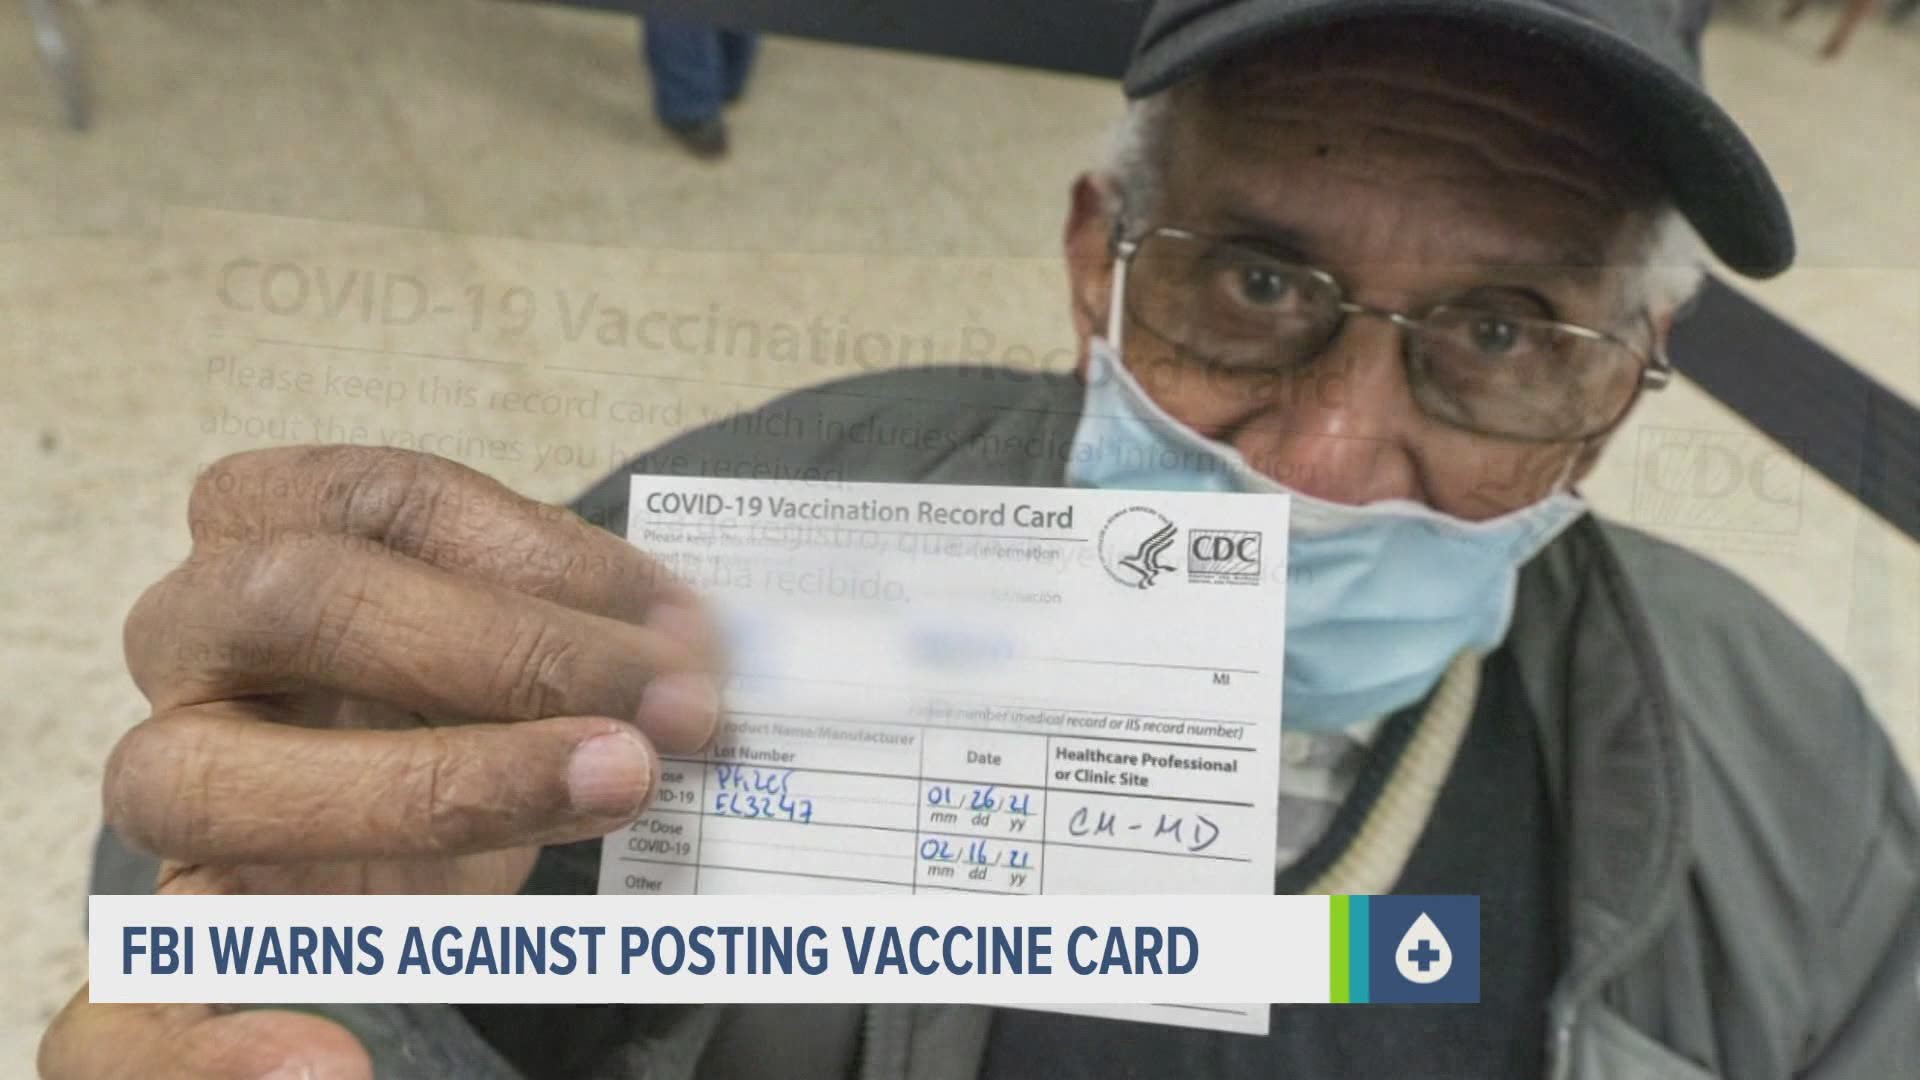 The FBI says many folks are receiving emails and tests post-vaccination to fill out a survey for cash. This isn't true. They're also warning of fake vaccine cards.